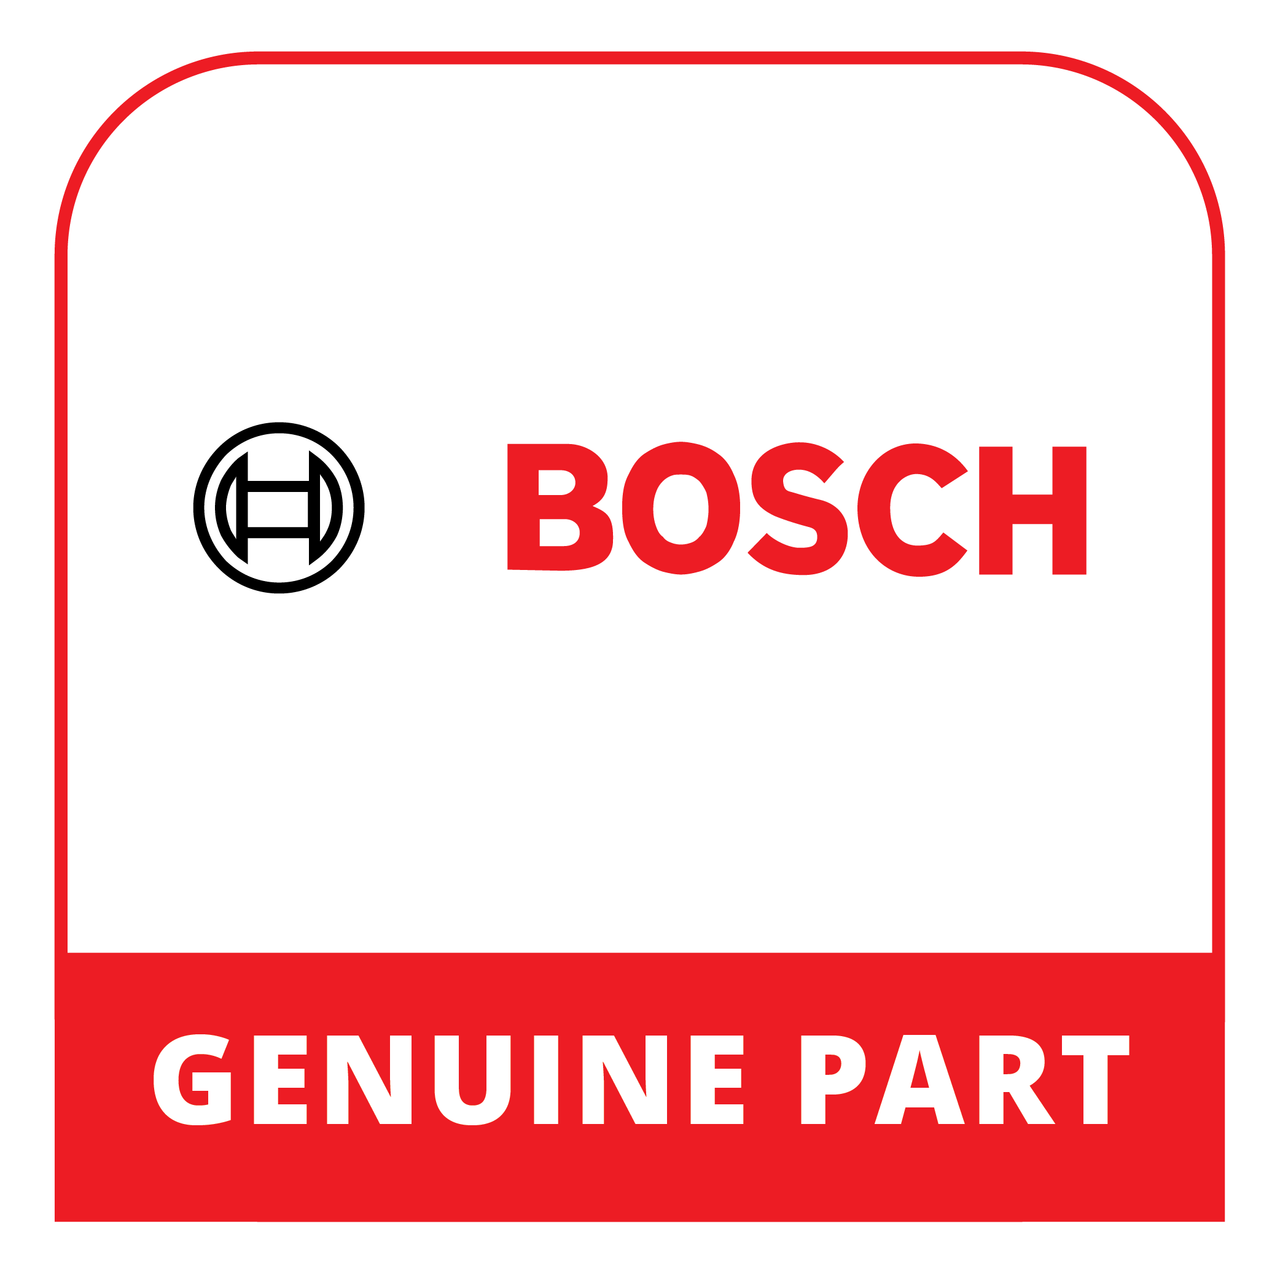 Bosch (Thermador) 20003086 - Cover Sheet - Genuine Bosch (Thermador) Part